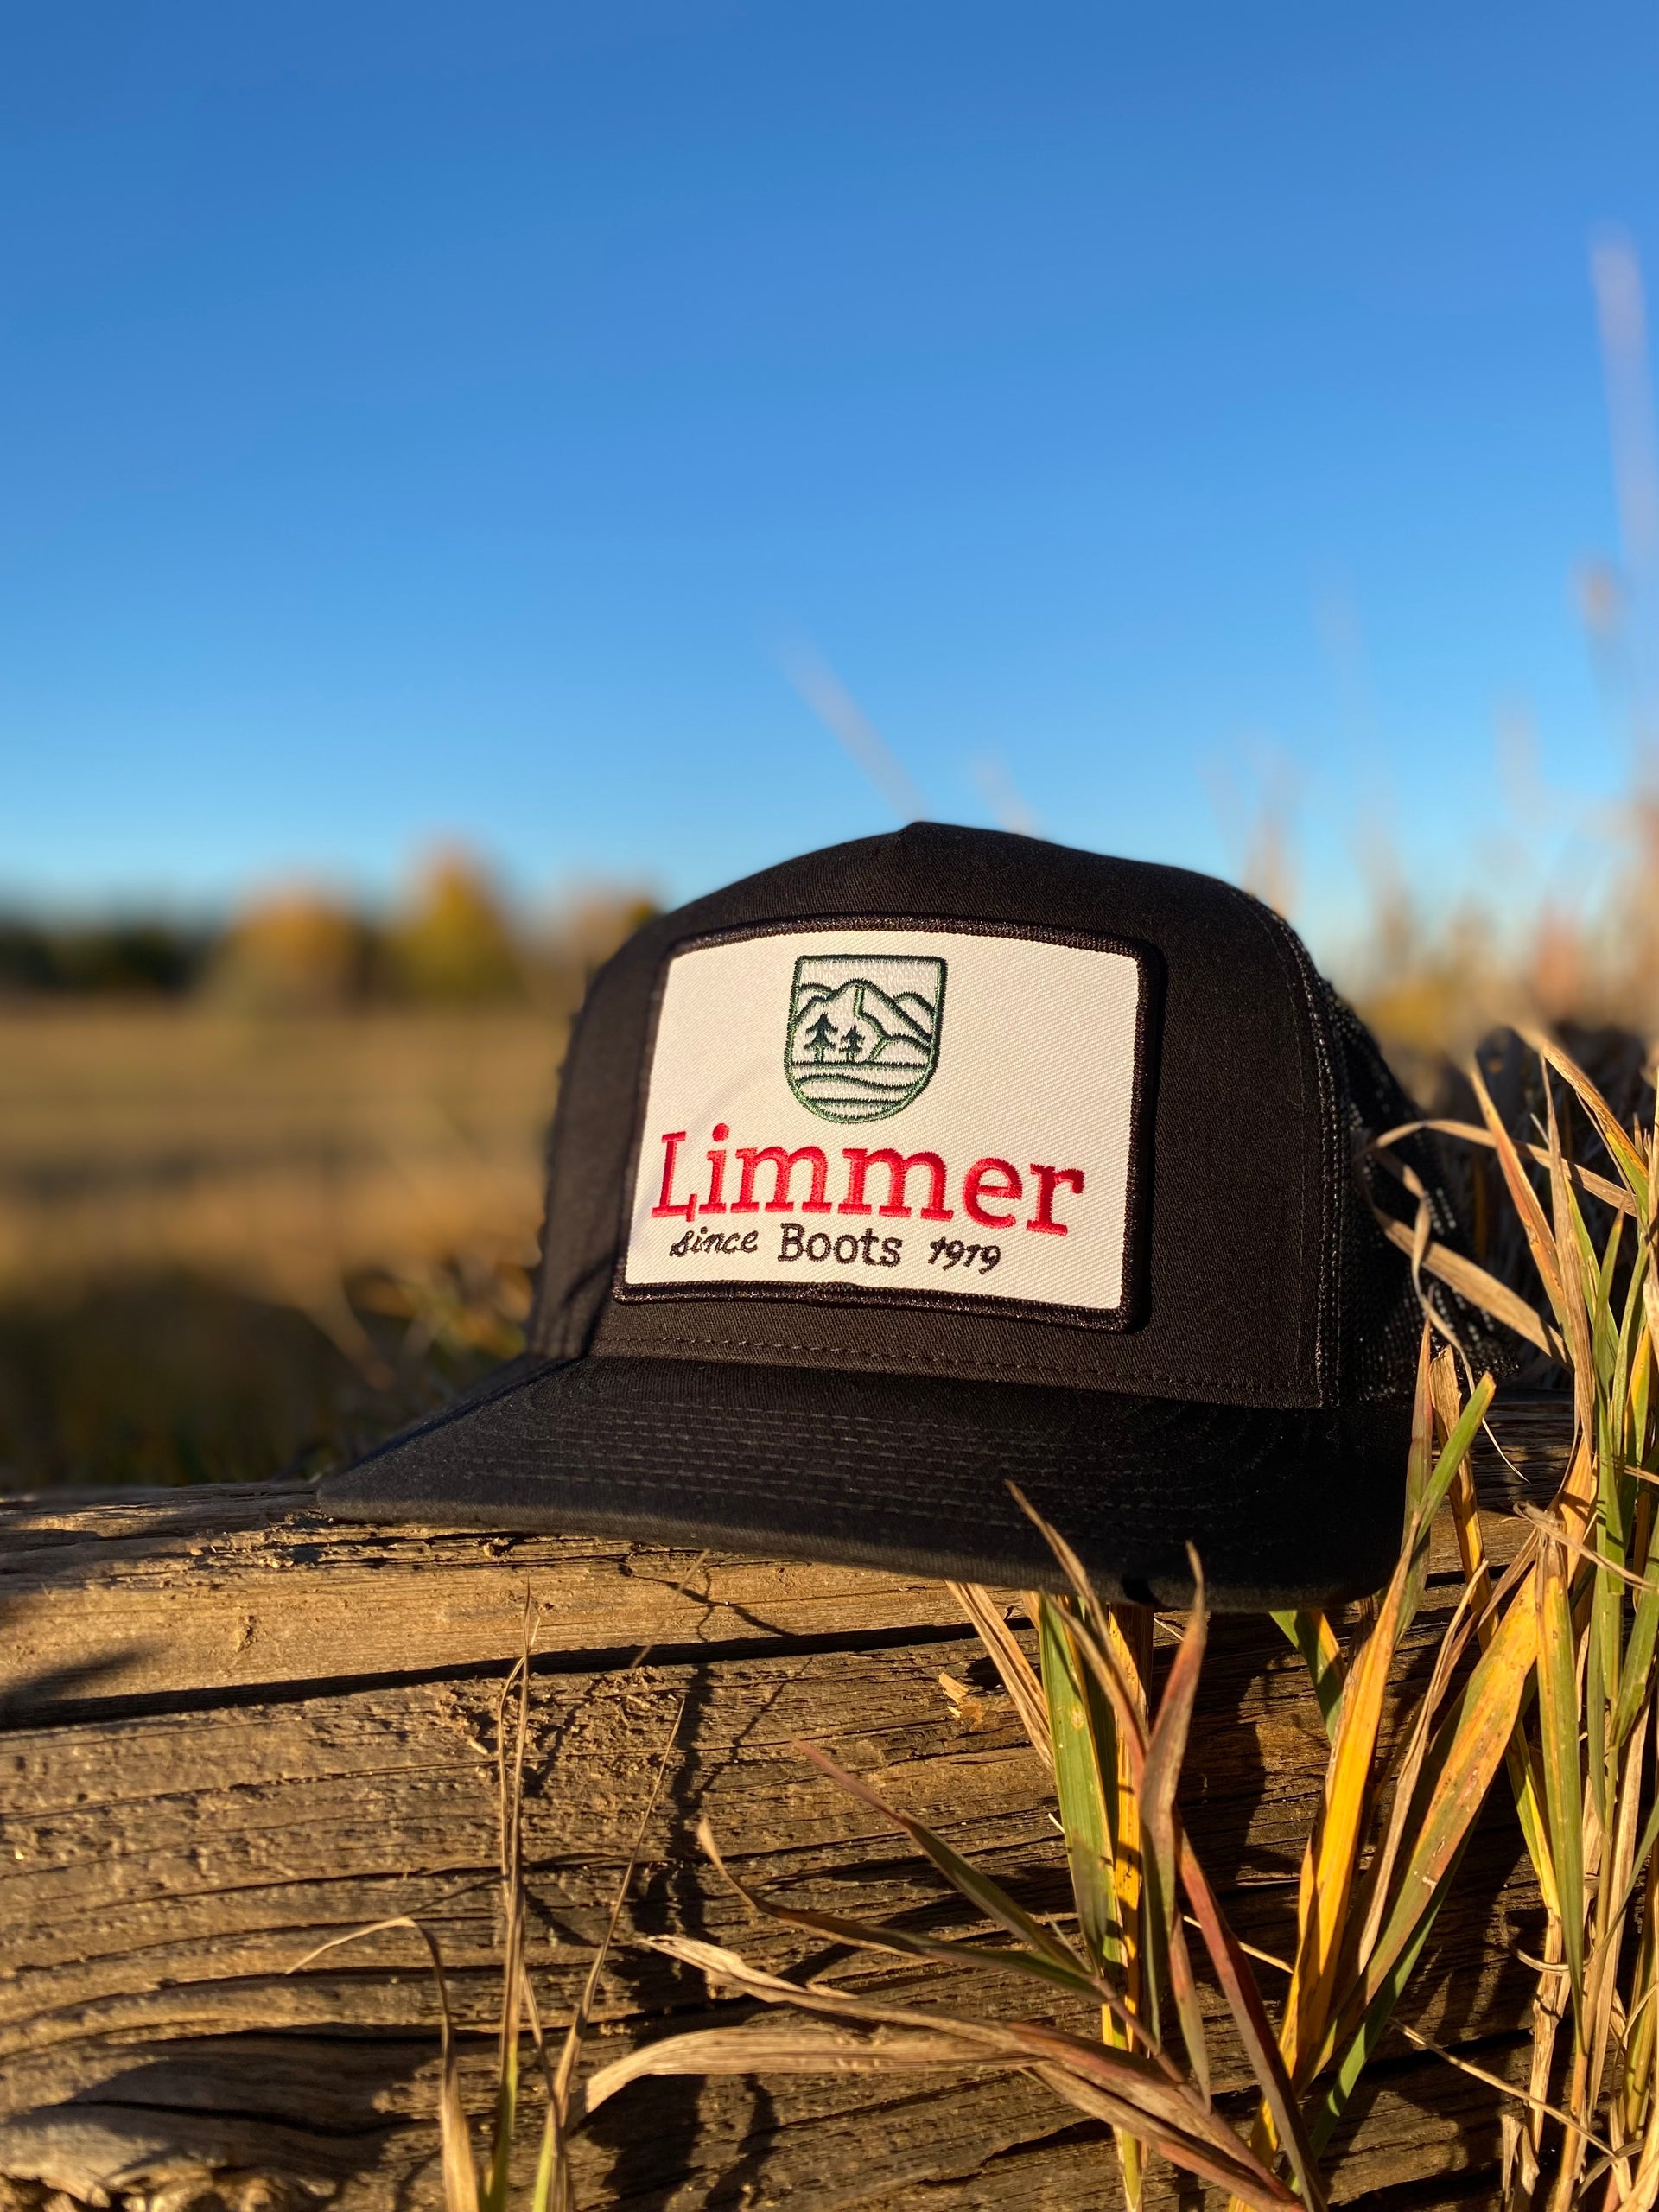 Limmer Hats – Limmer Boots